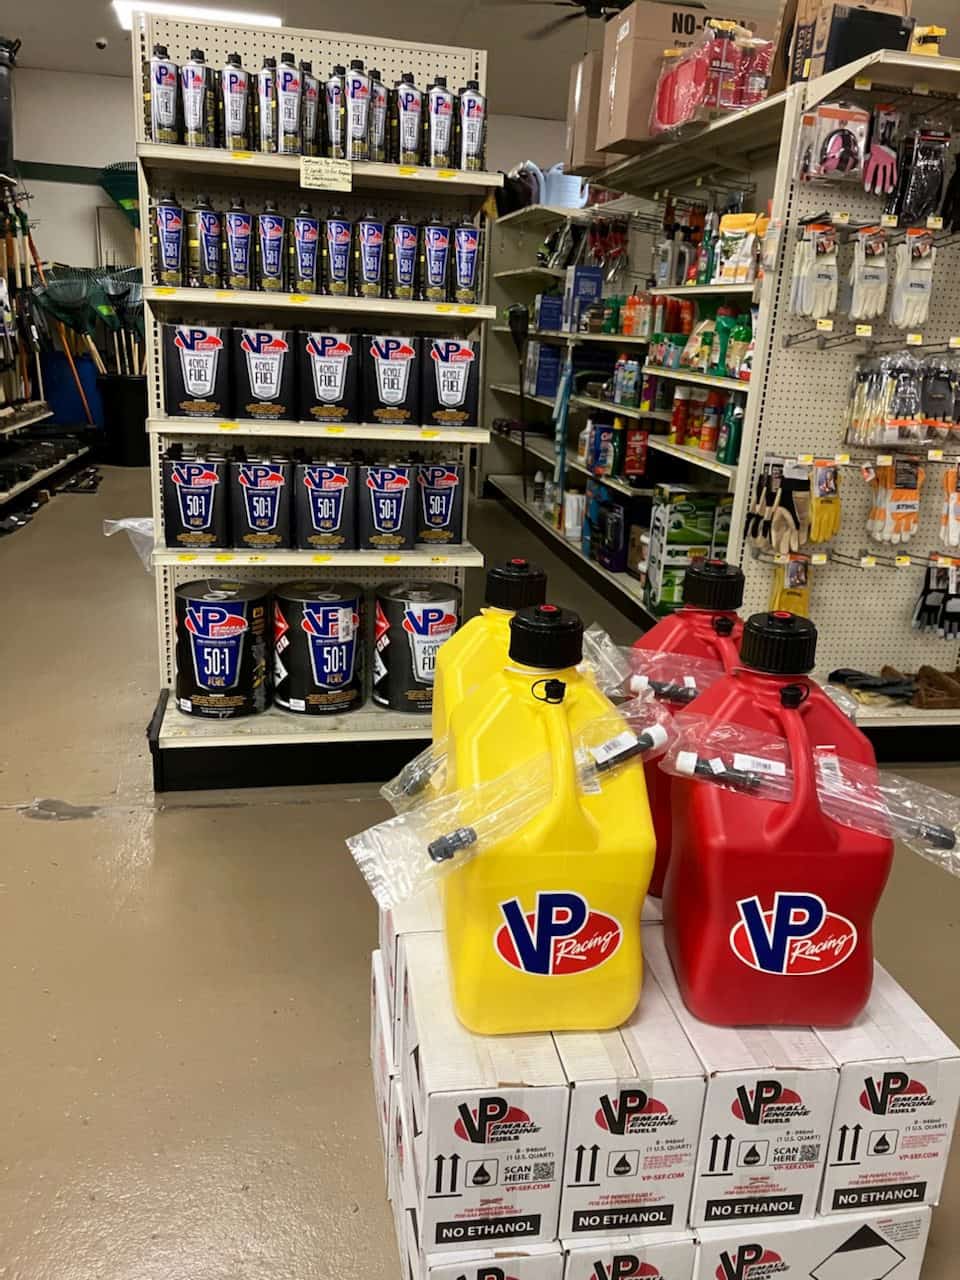 VP Small Engine Fuels on shelves inside D-S Lawn & Auto, with VP Motorsport Containers displayed. in front. Owner David McClinton says VP small engine fuel is the best gas for lawnmowers and other portable outdoor equipment.